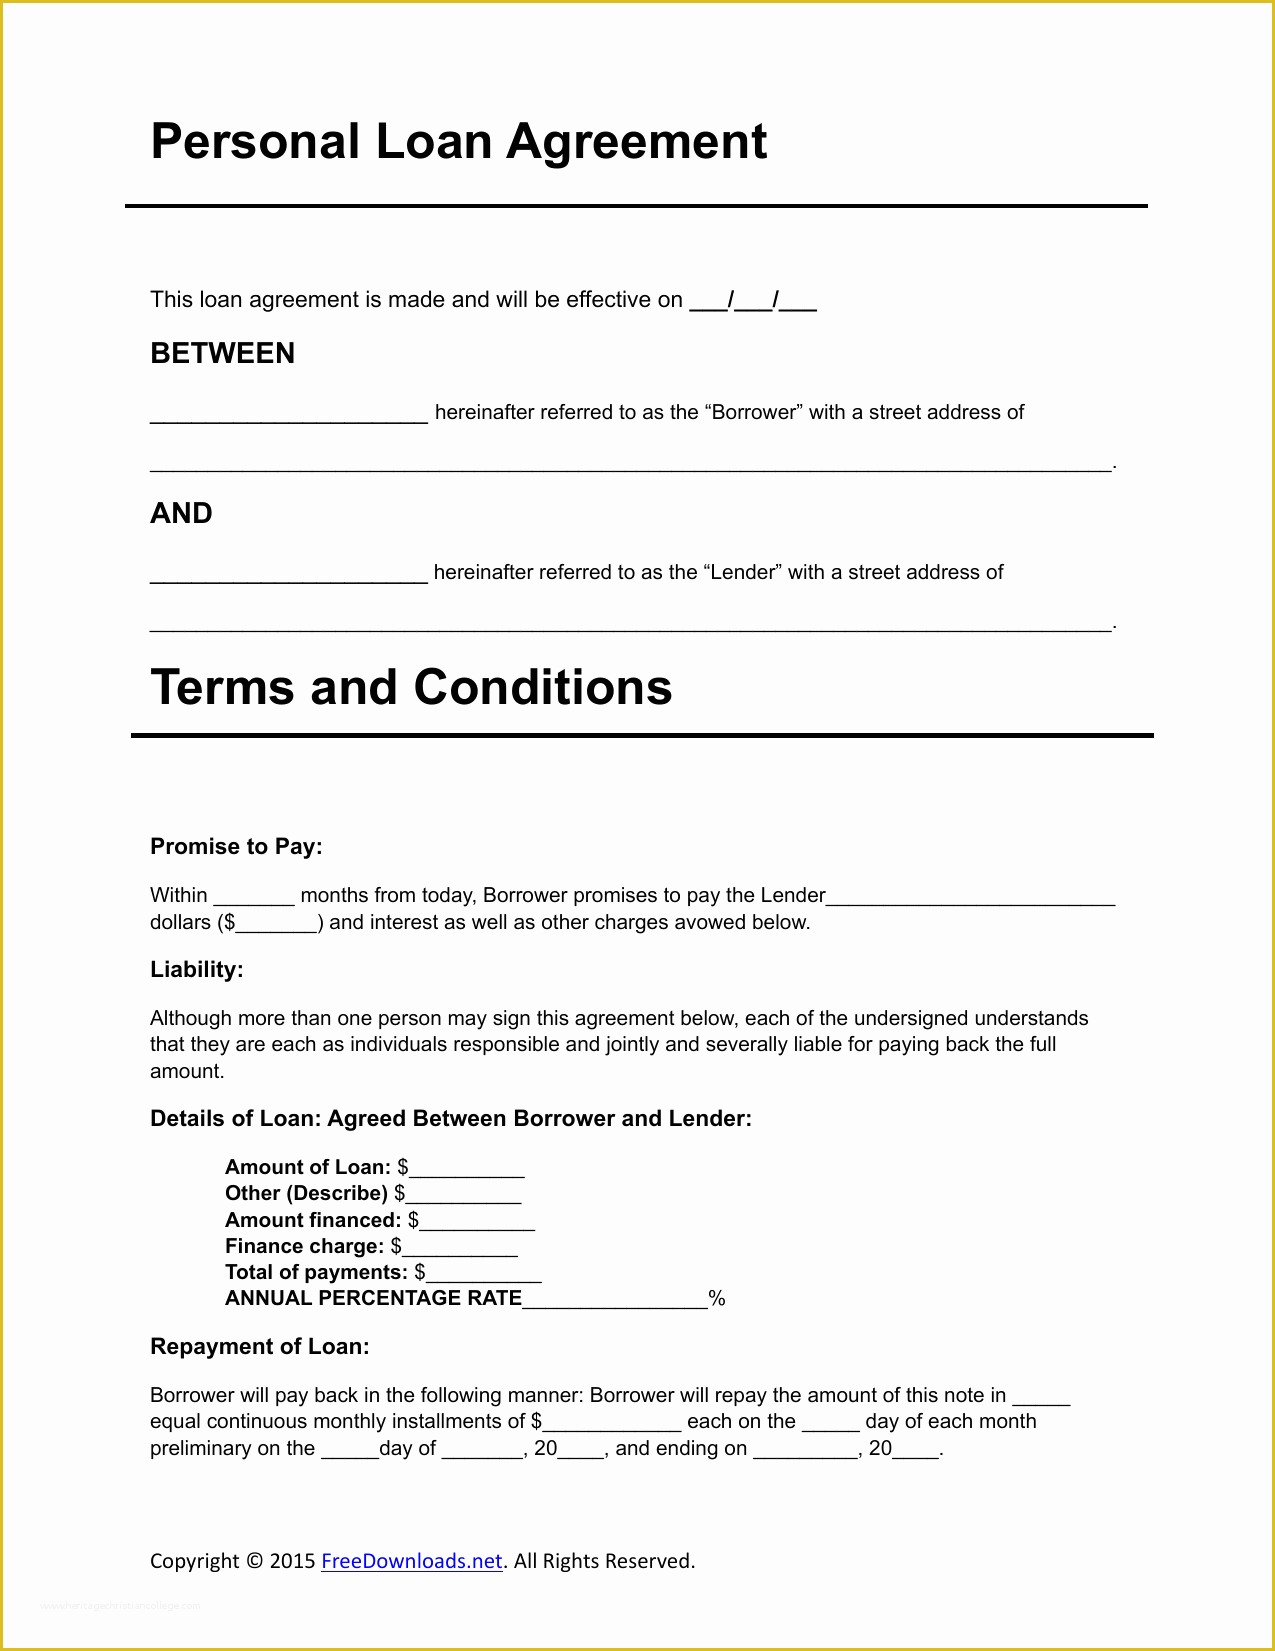 Unsecured Loan Agreement Template Free Of Download Personal Loan Agreement Template Pdf